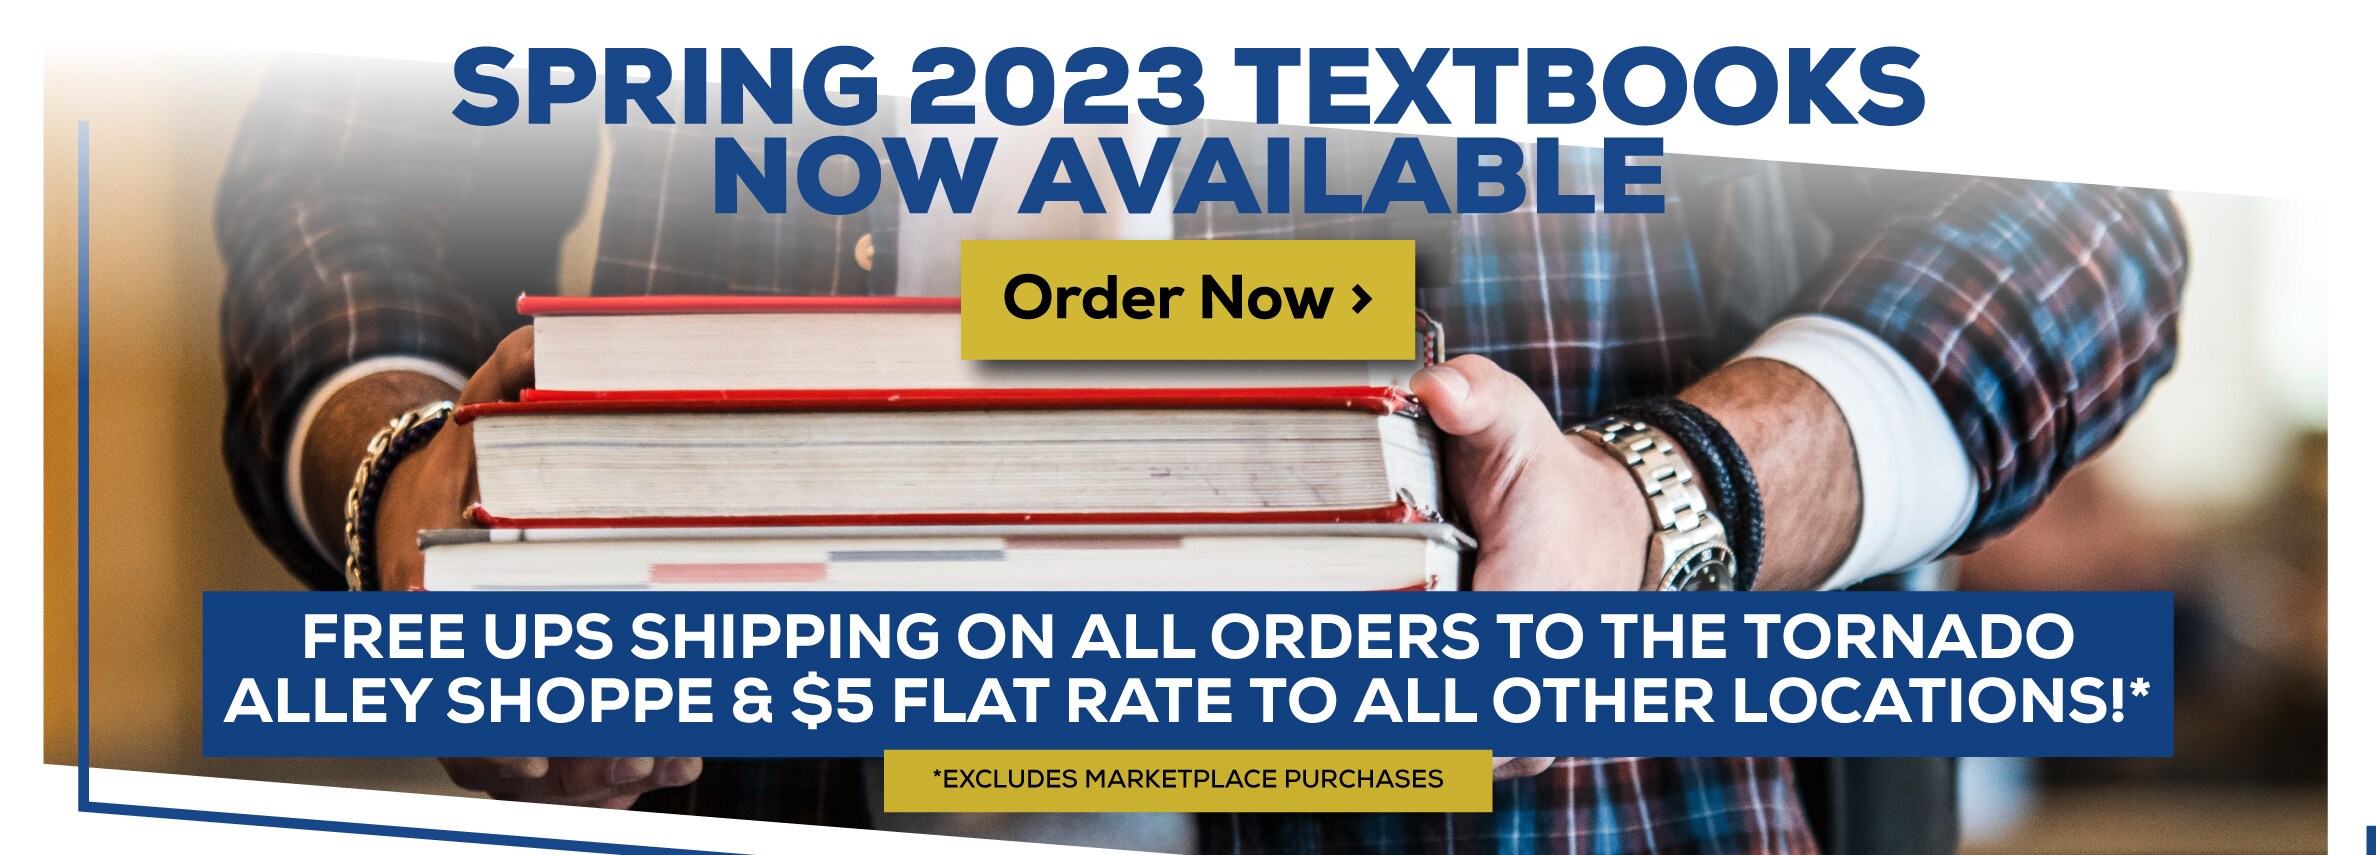 Spring 2023 Textbooks Now Available! Free UPS shipping on all orders to The Tornado Alley Shoppe & $5 flat rate to all other locations!* Excludes marketplace purchases. Order Now.